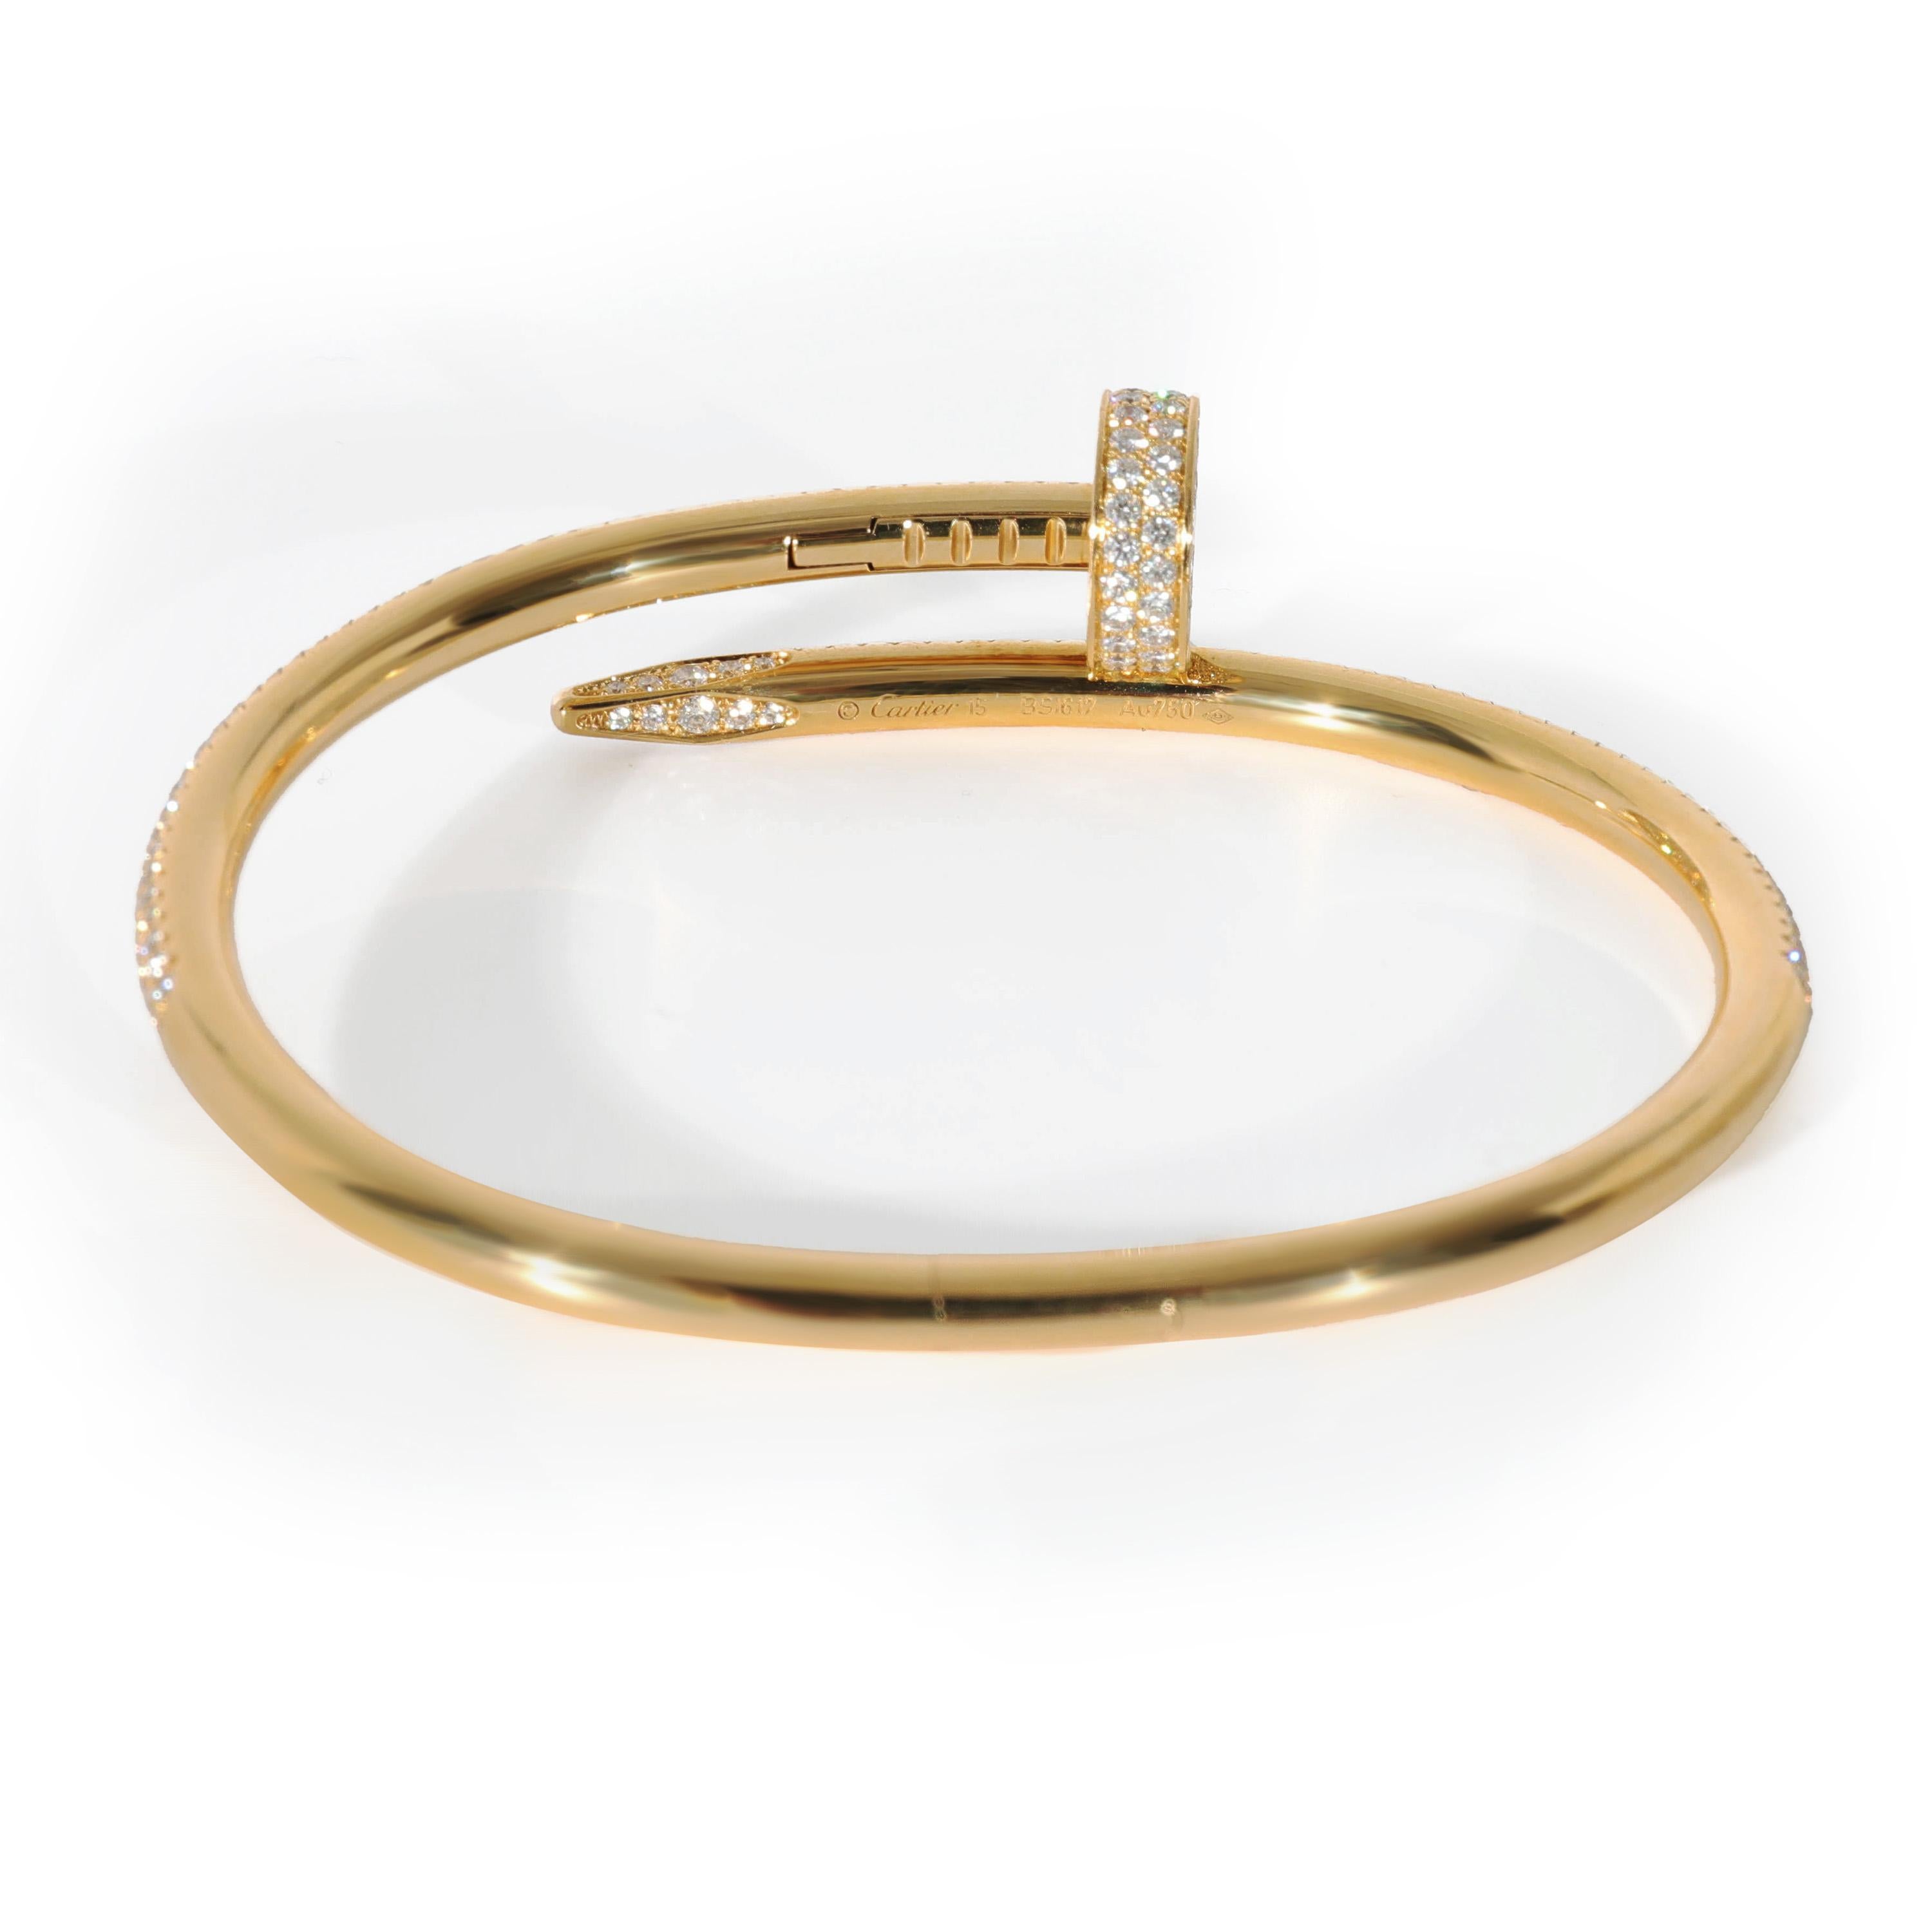 Cartier Juste Un Clou Diamond Pave Bracelet in 18K Yellow Gold 2.26 CTW

PRIMARY DETAILS
SKU: 131567
Listing Title: Cartier Juste Un Clou Diamond Pave Bracelet in 18K Yellow Gold 2.26 CTW
Condition Description: Translating to 'just a nail', the